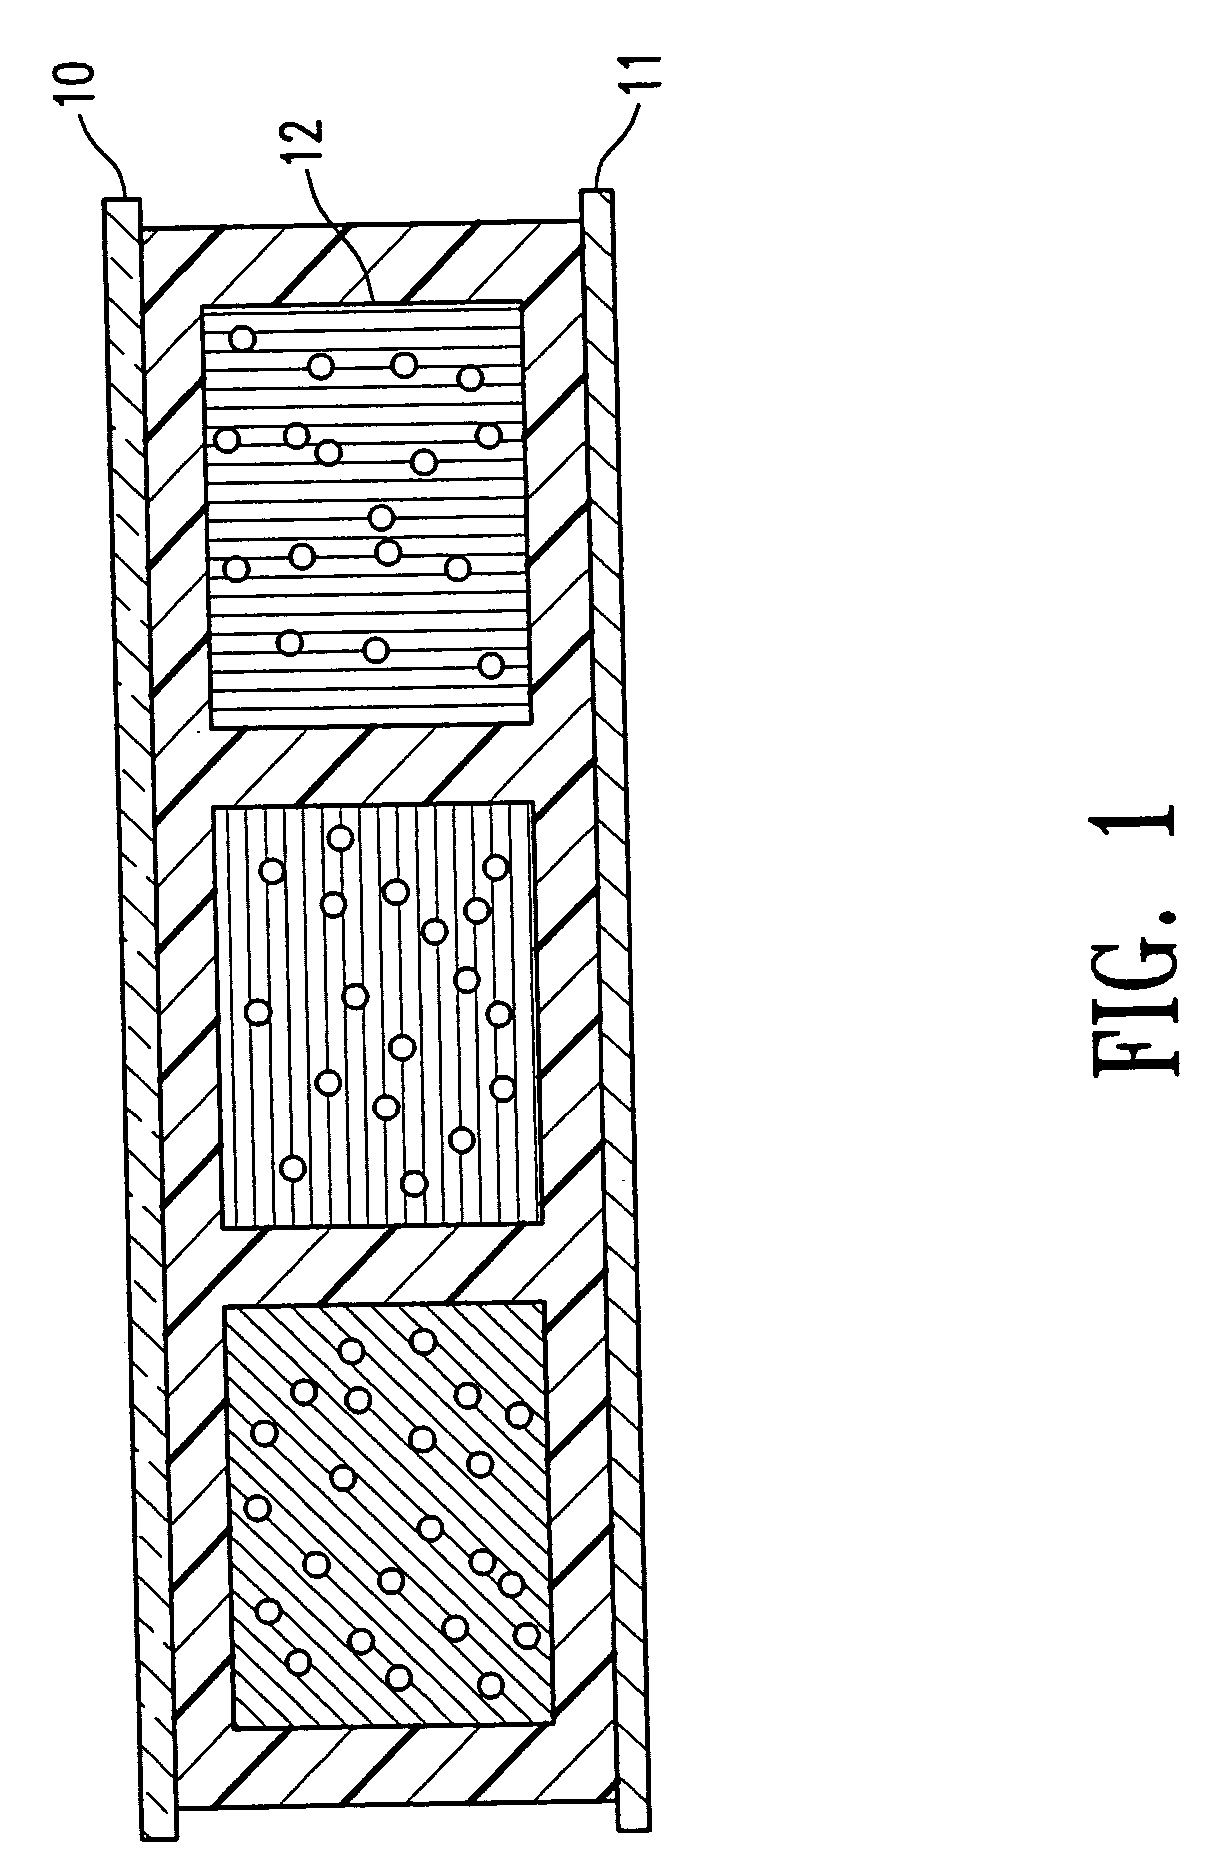 Electrophoretic display and process for its manufacture